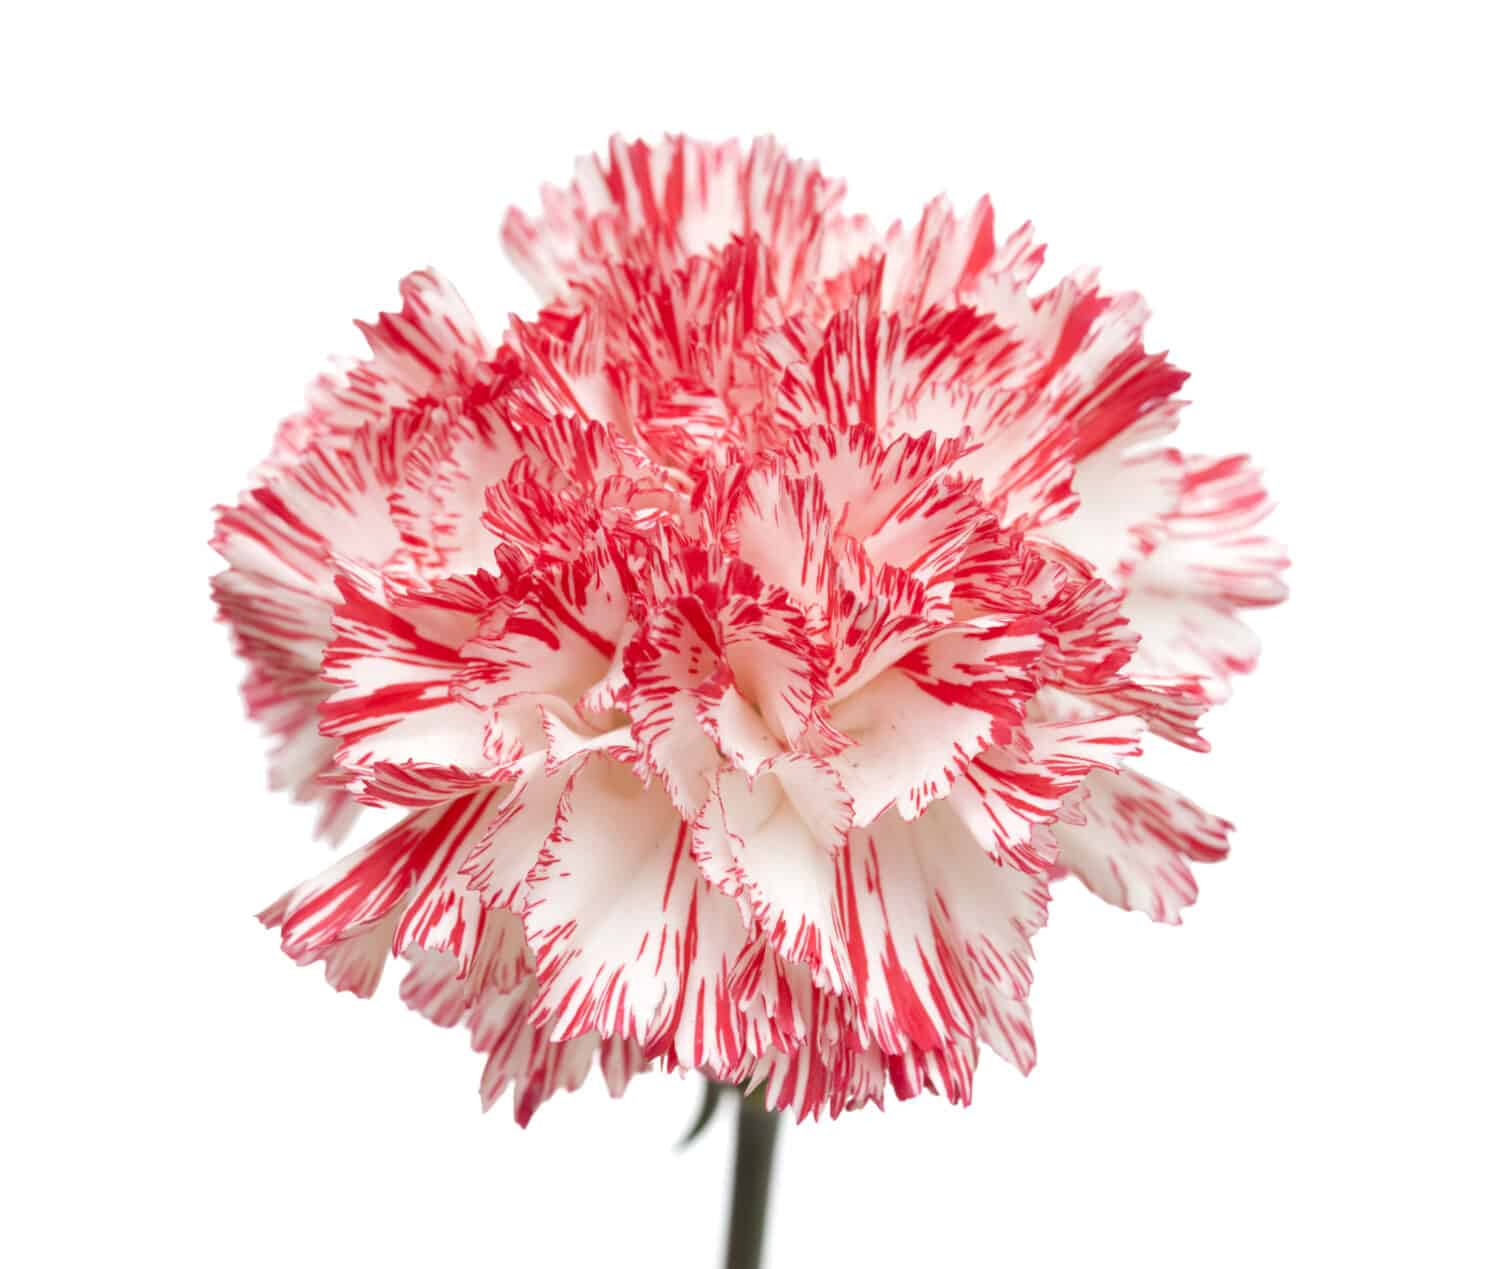 white and bright pink carnation isolated on white backgrond